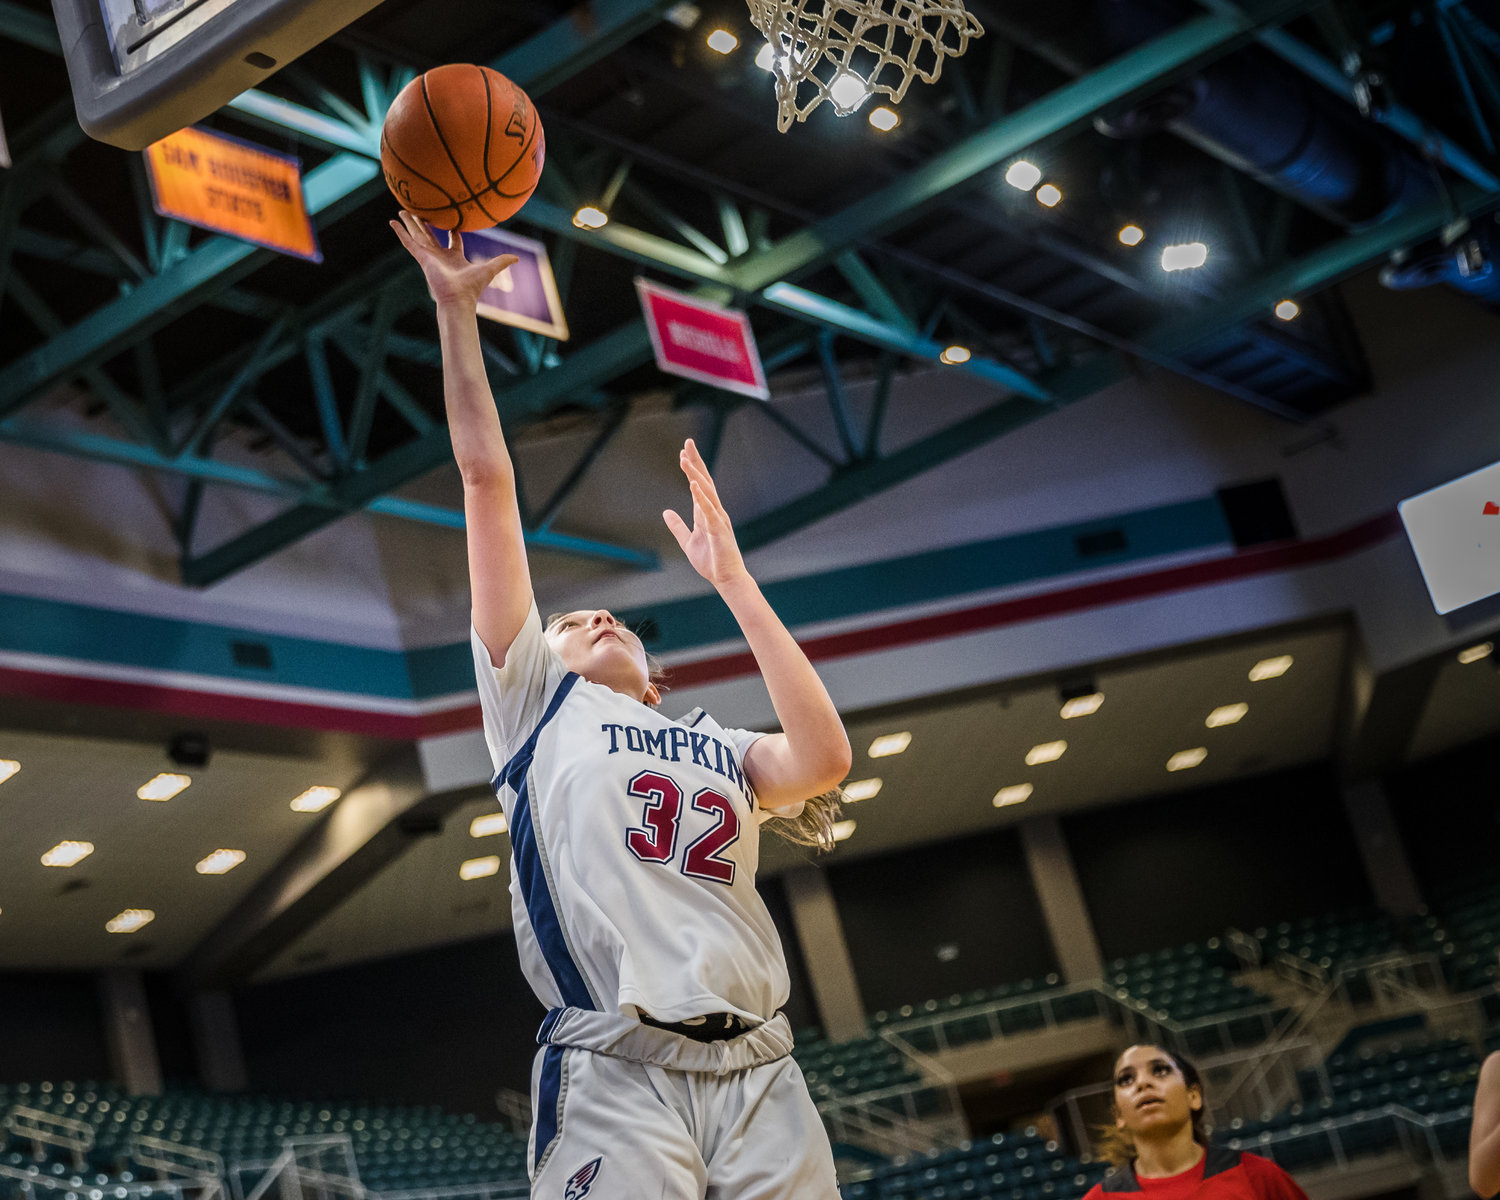 Sophomore Macy Spencer and the No. 14 state-ranked Tompkins Falcons are one of four Katy ISD teams playing in a playoff quadruple-header at the Merrell Center on Saturday, Feb. 20.